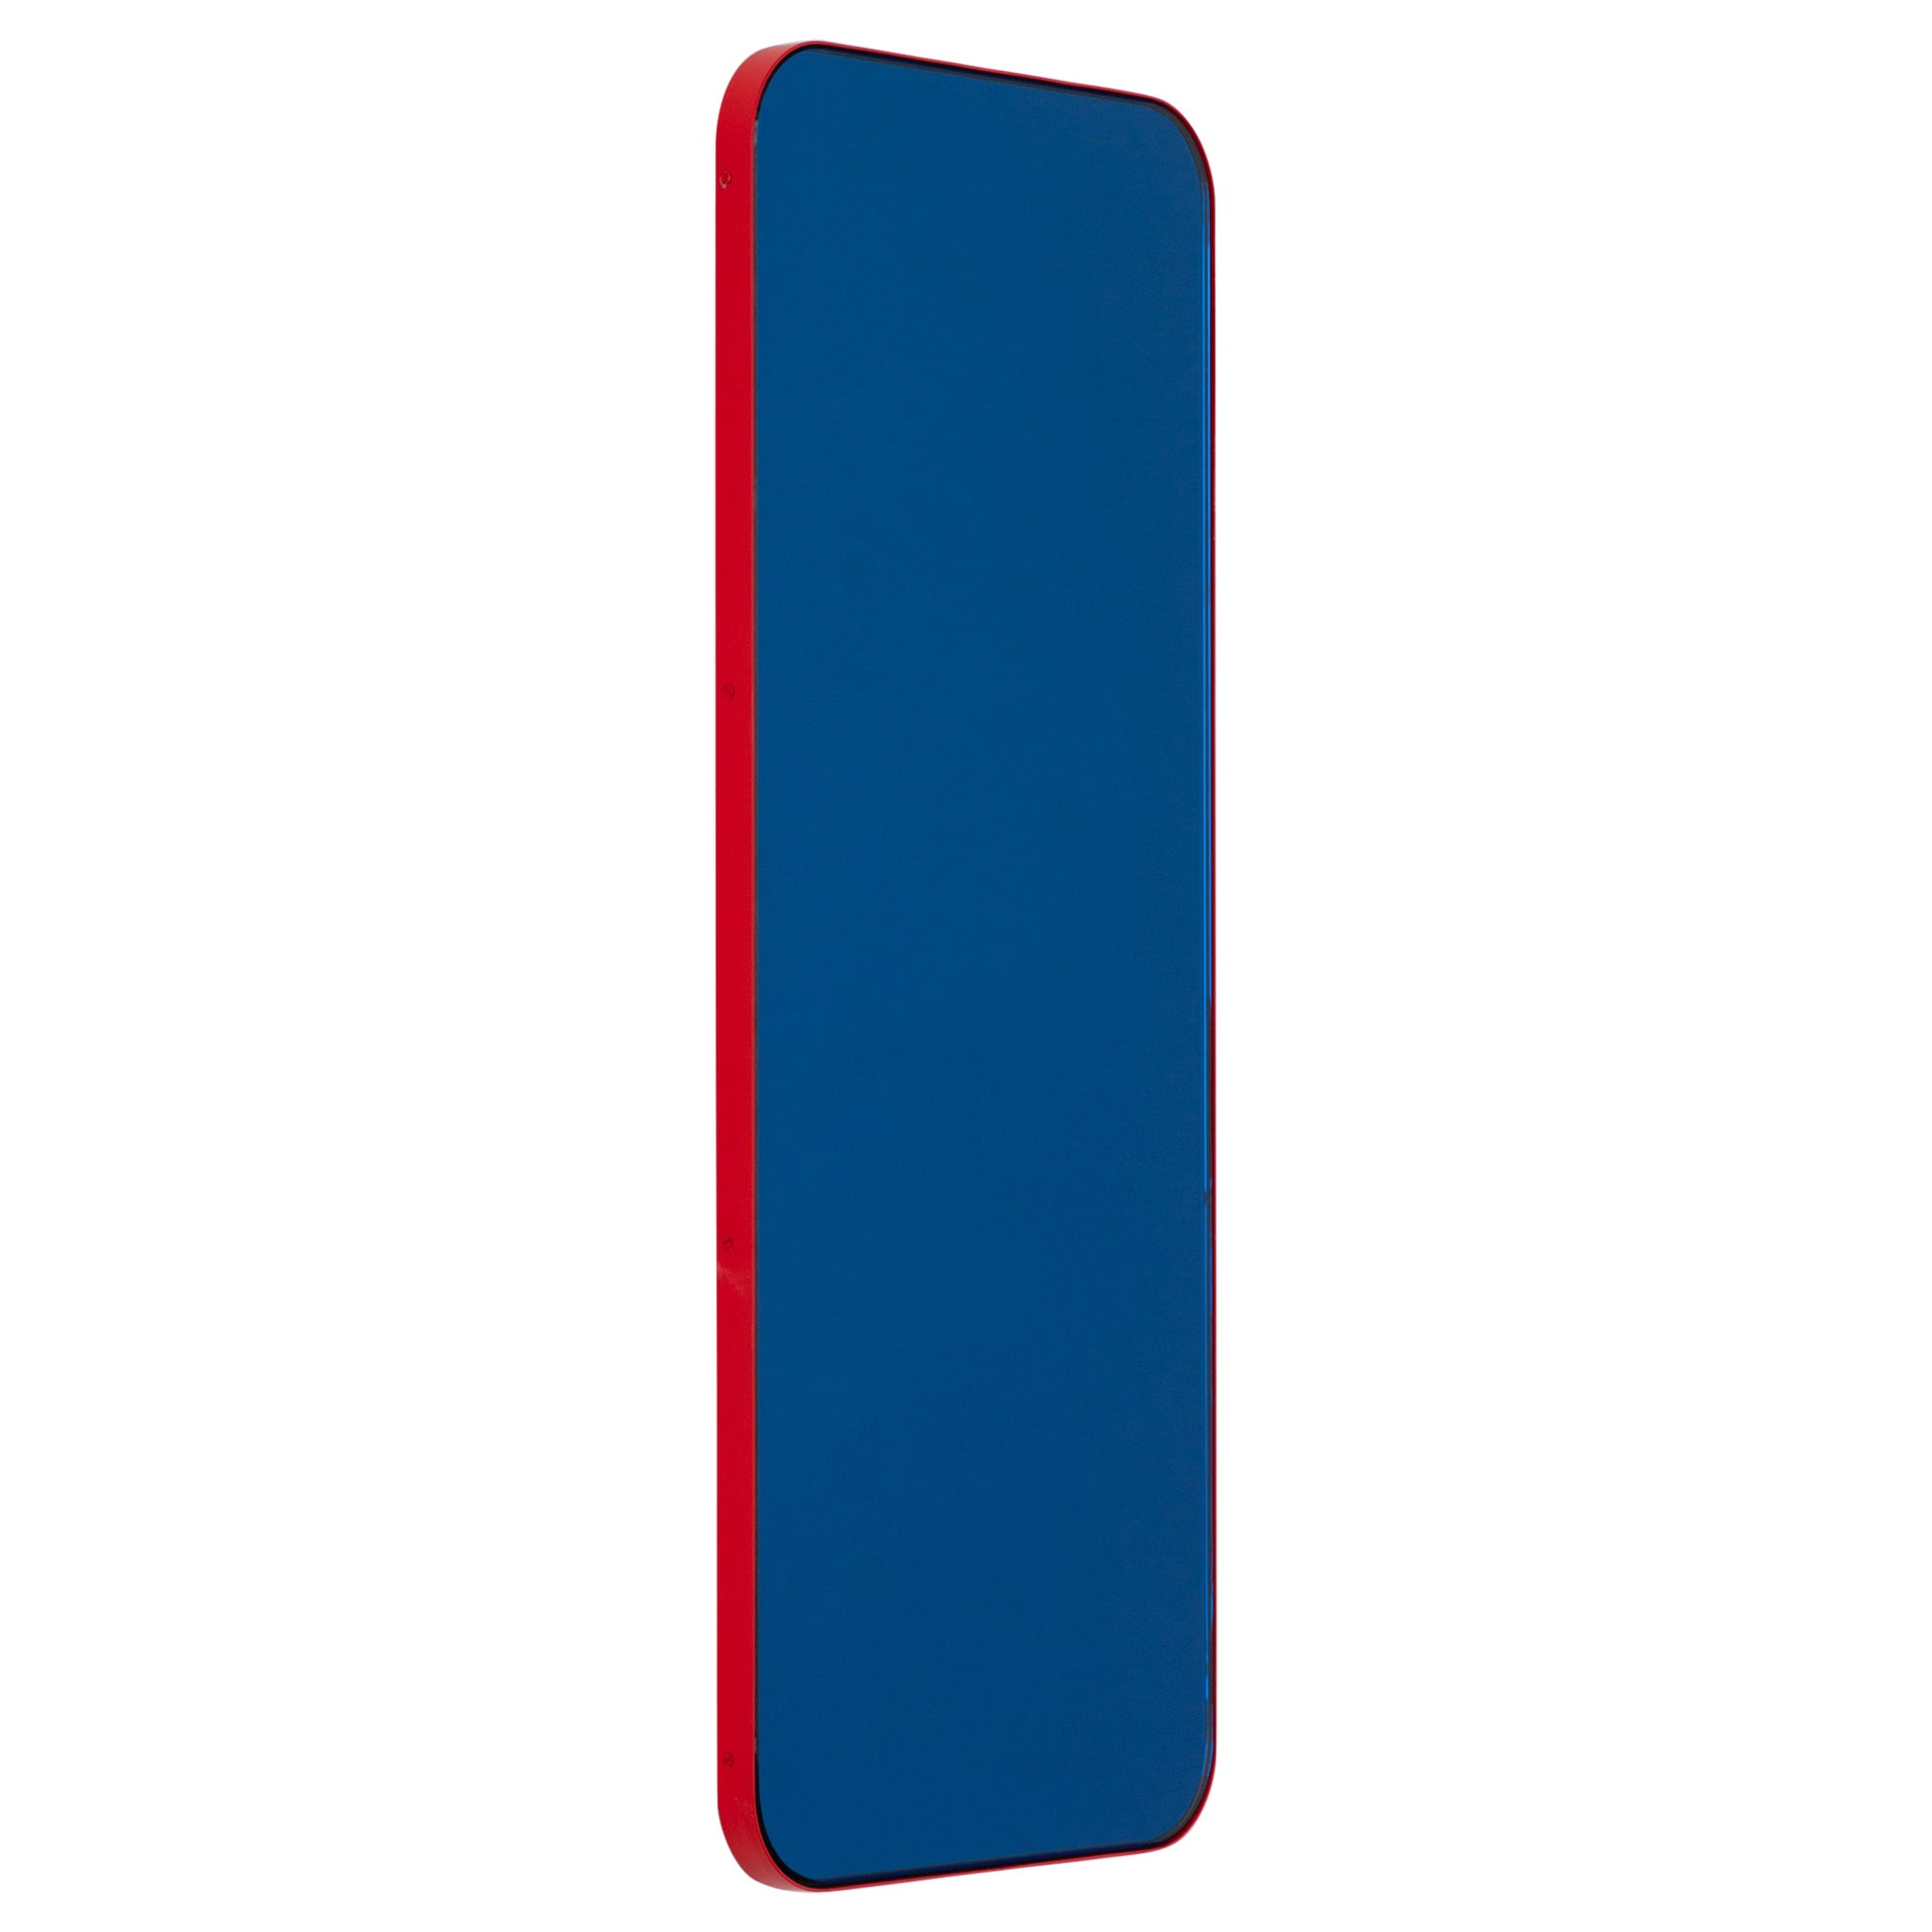 Quadris Rectangular Contemporary Blue Mirror with a Red Frame, Small For Sale